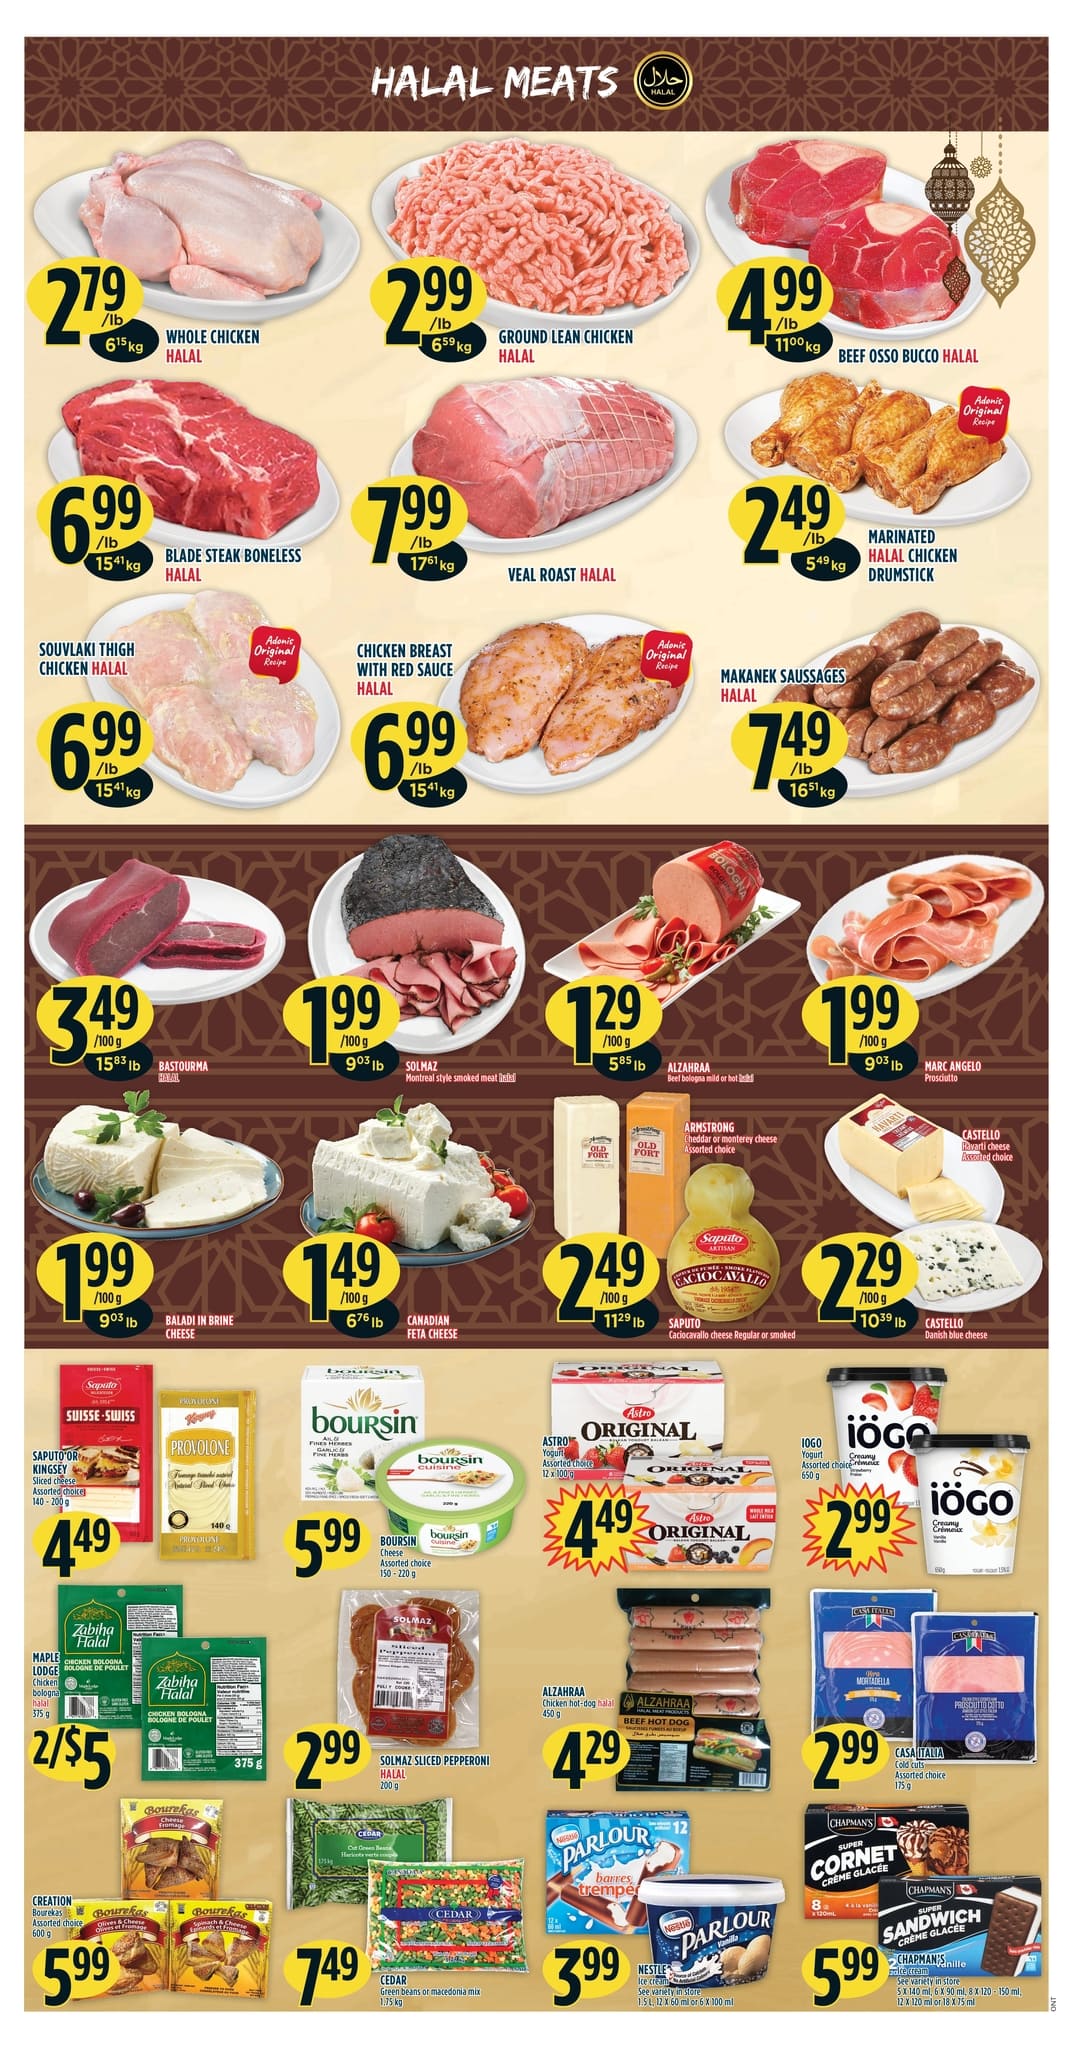 Adonis - Weekly Flyer Specials - Page 4